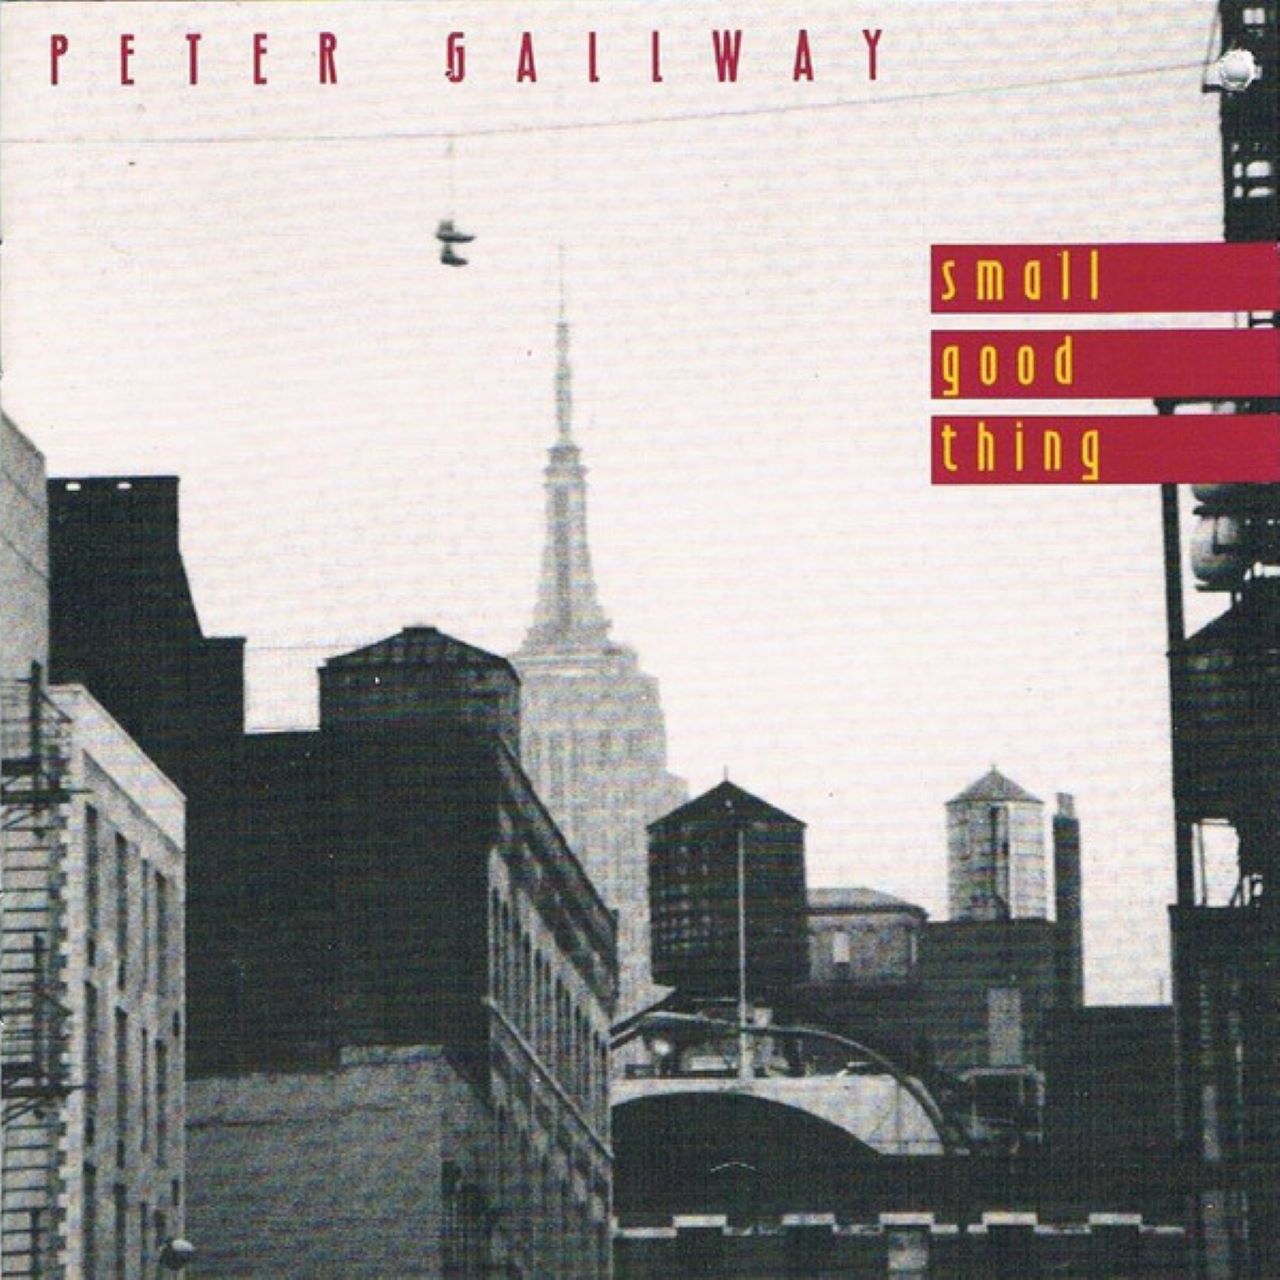 Peter Gallway - Small Good Thing cover album